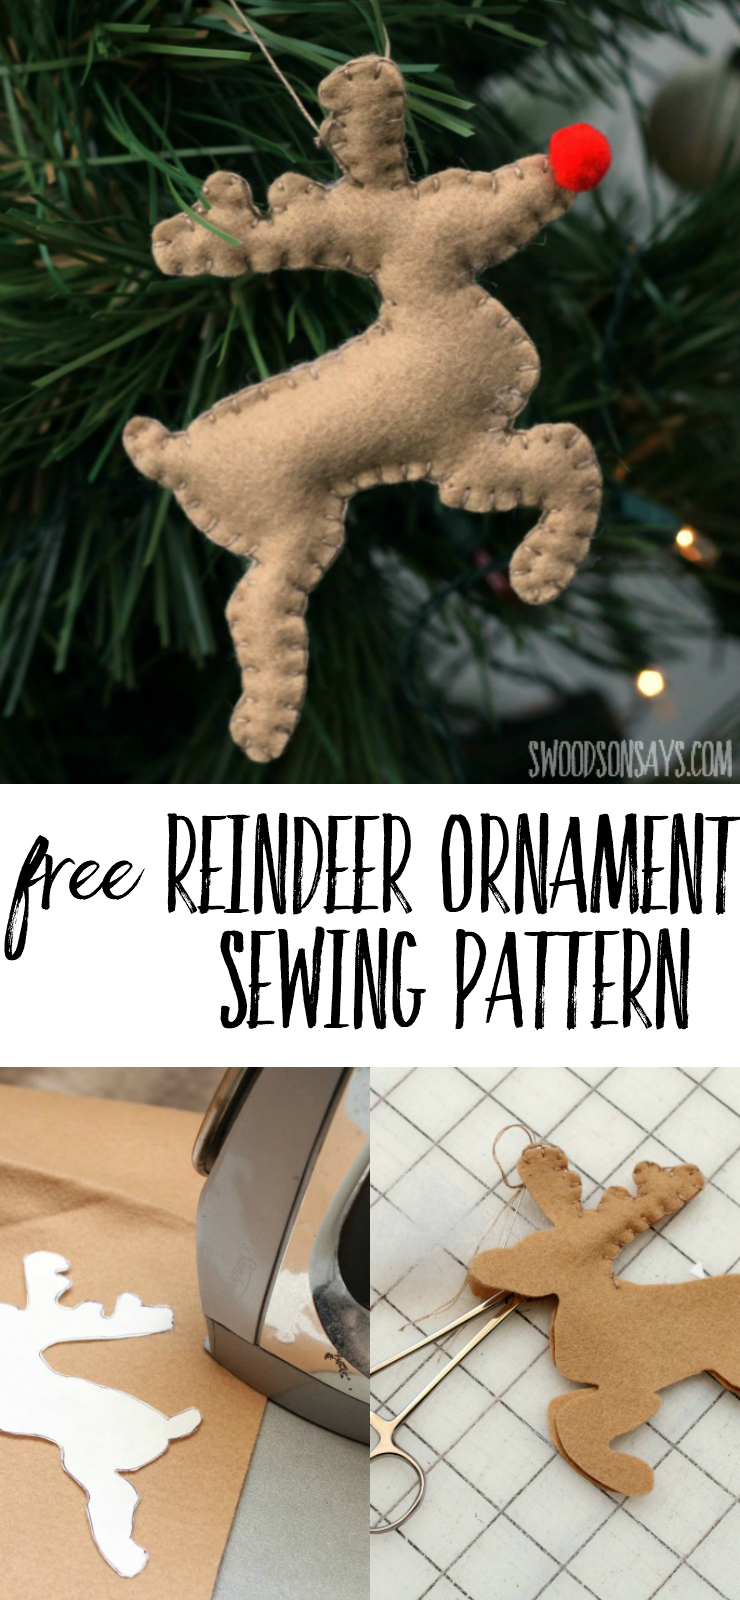 Use this free reindeer ornament sewing pattern to sew up a Rudolph for your tree! #reindeersoftie